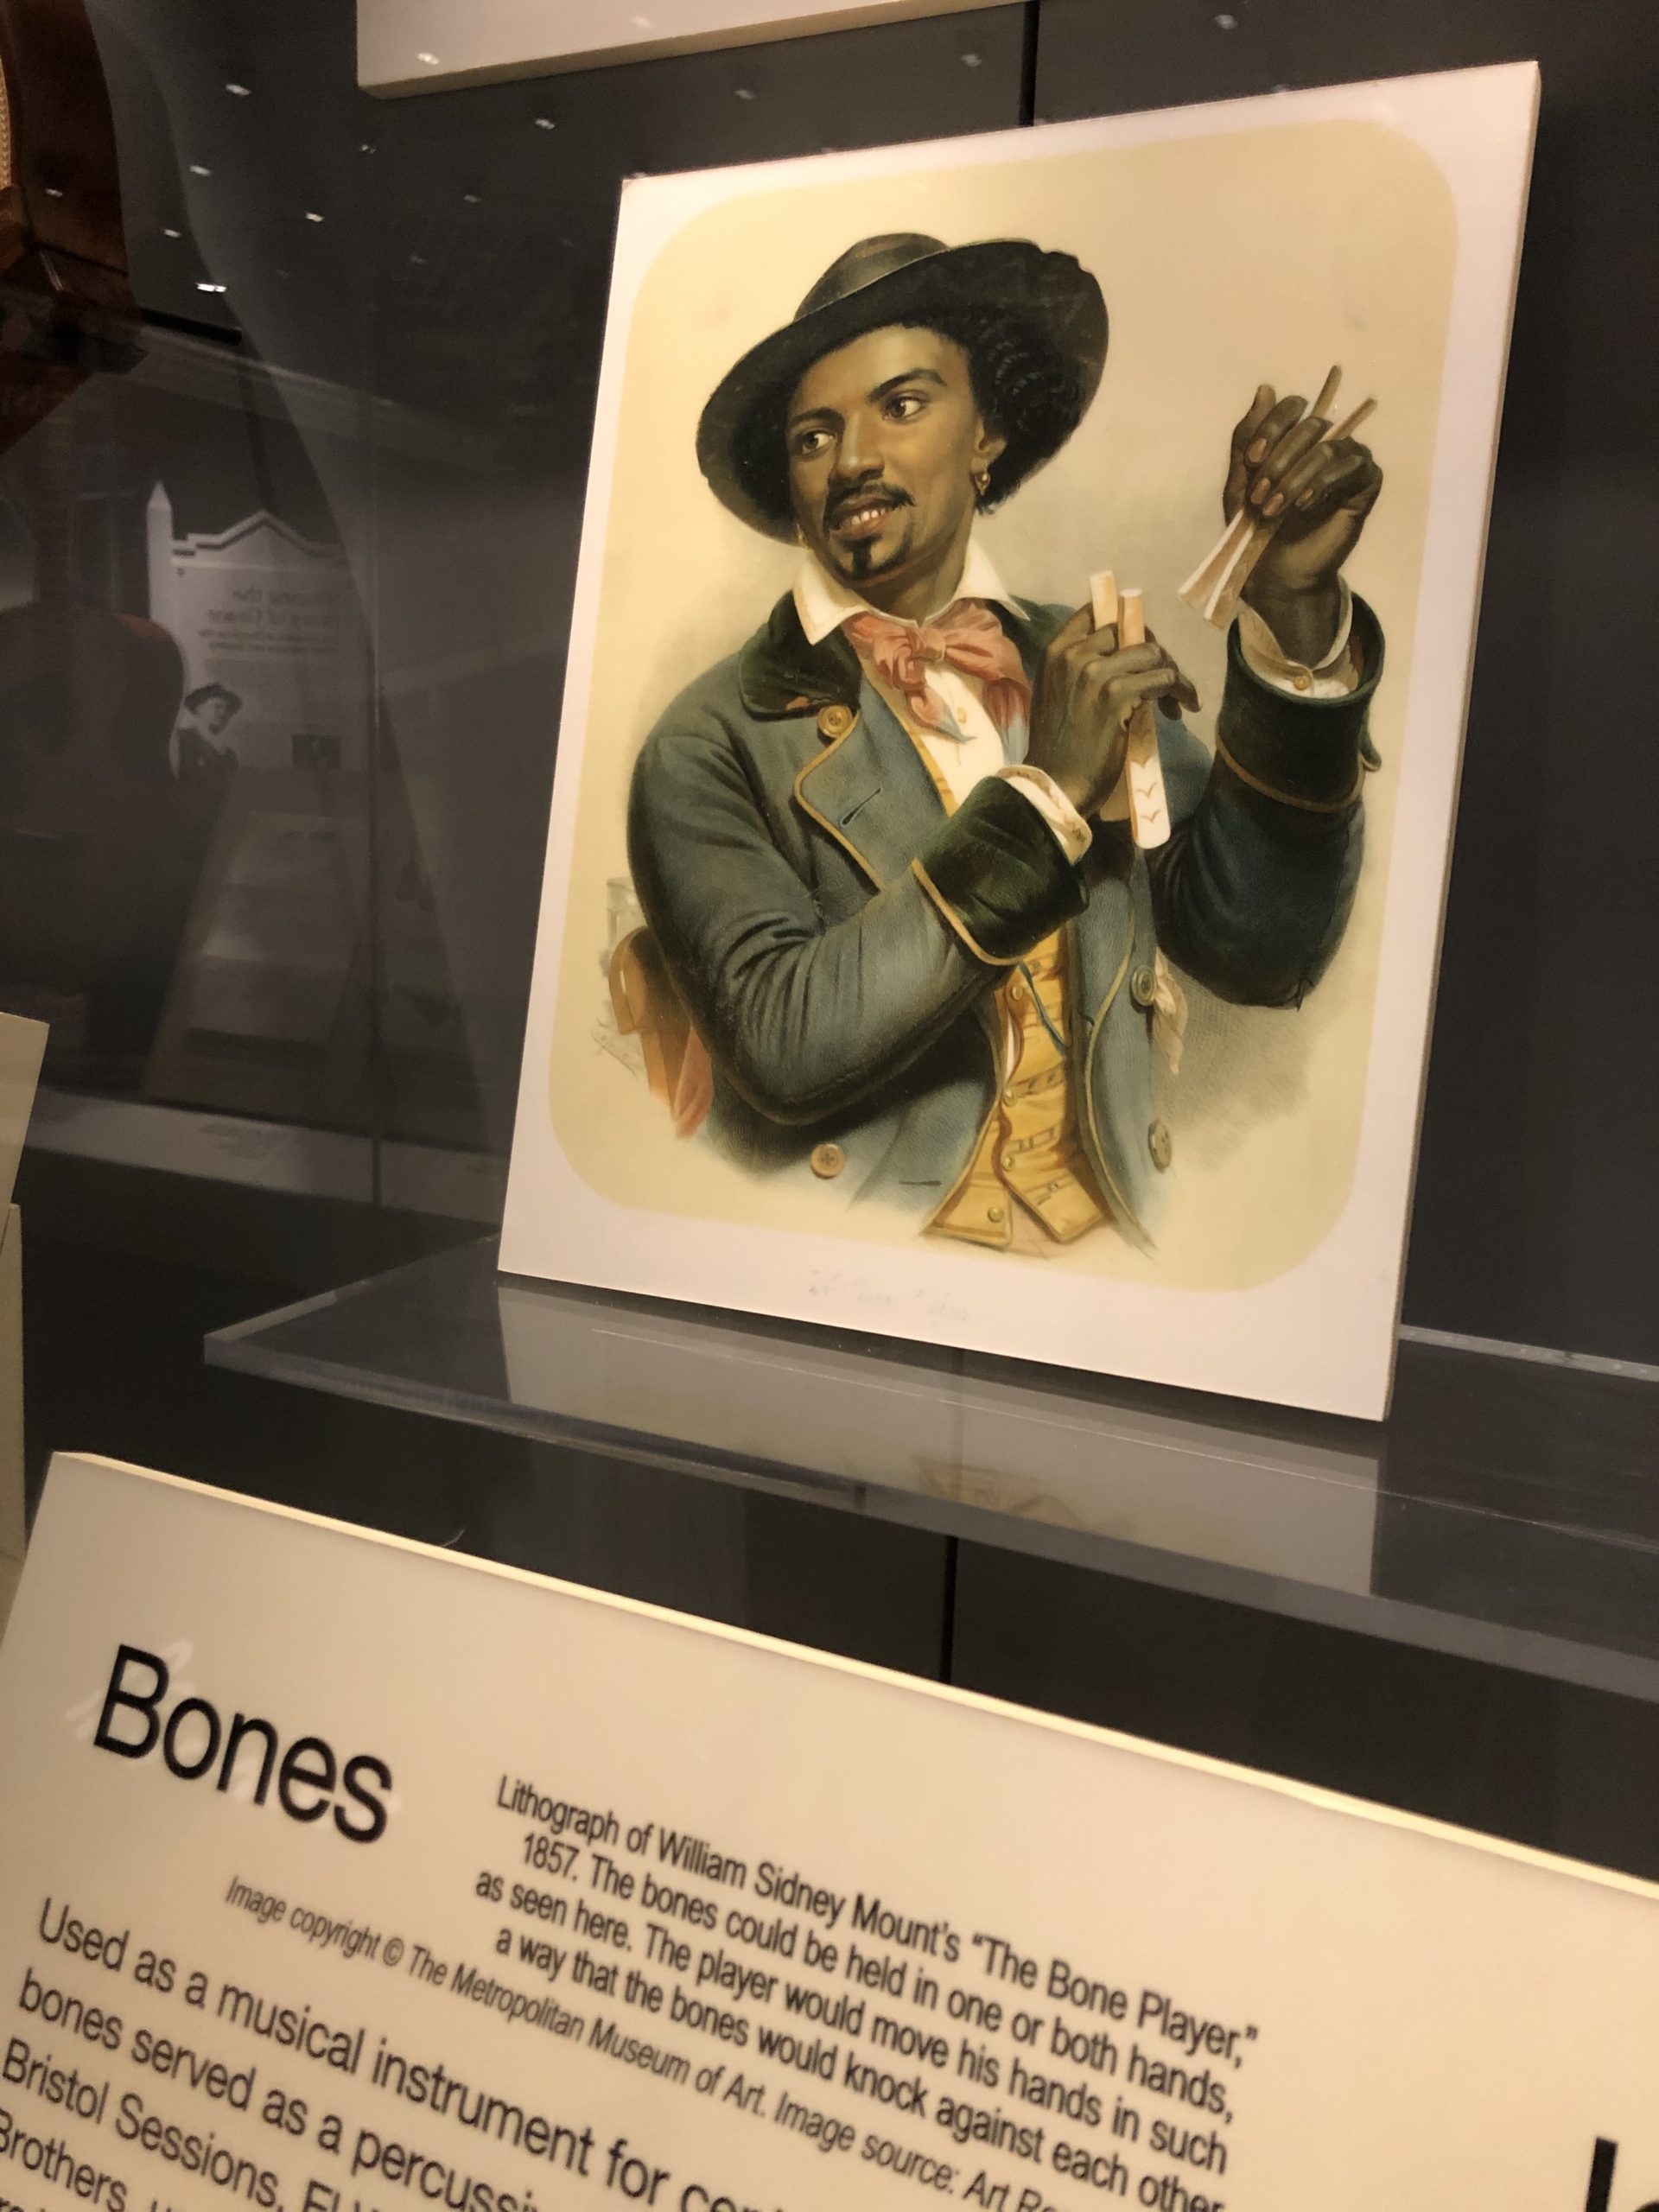 An image of an exhibit case with William Sidney Mount's "The Bone Player" -- a black musician wearing a hat, jacket, waistcoat, and cravat-like tie, and holding two pairs of bones in his hands.